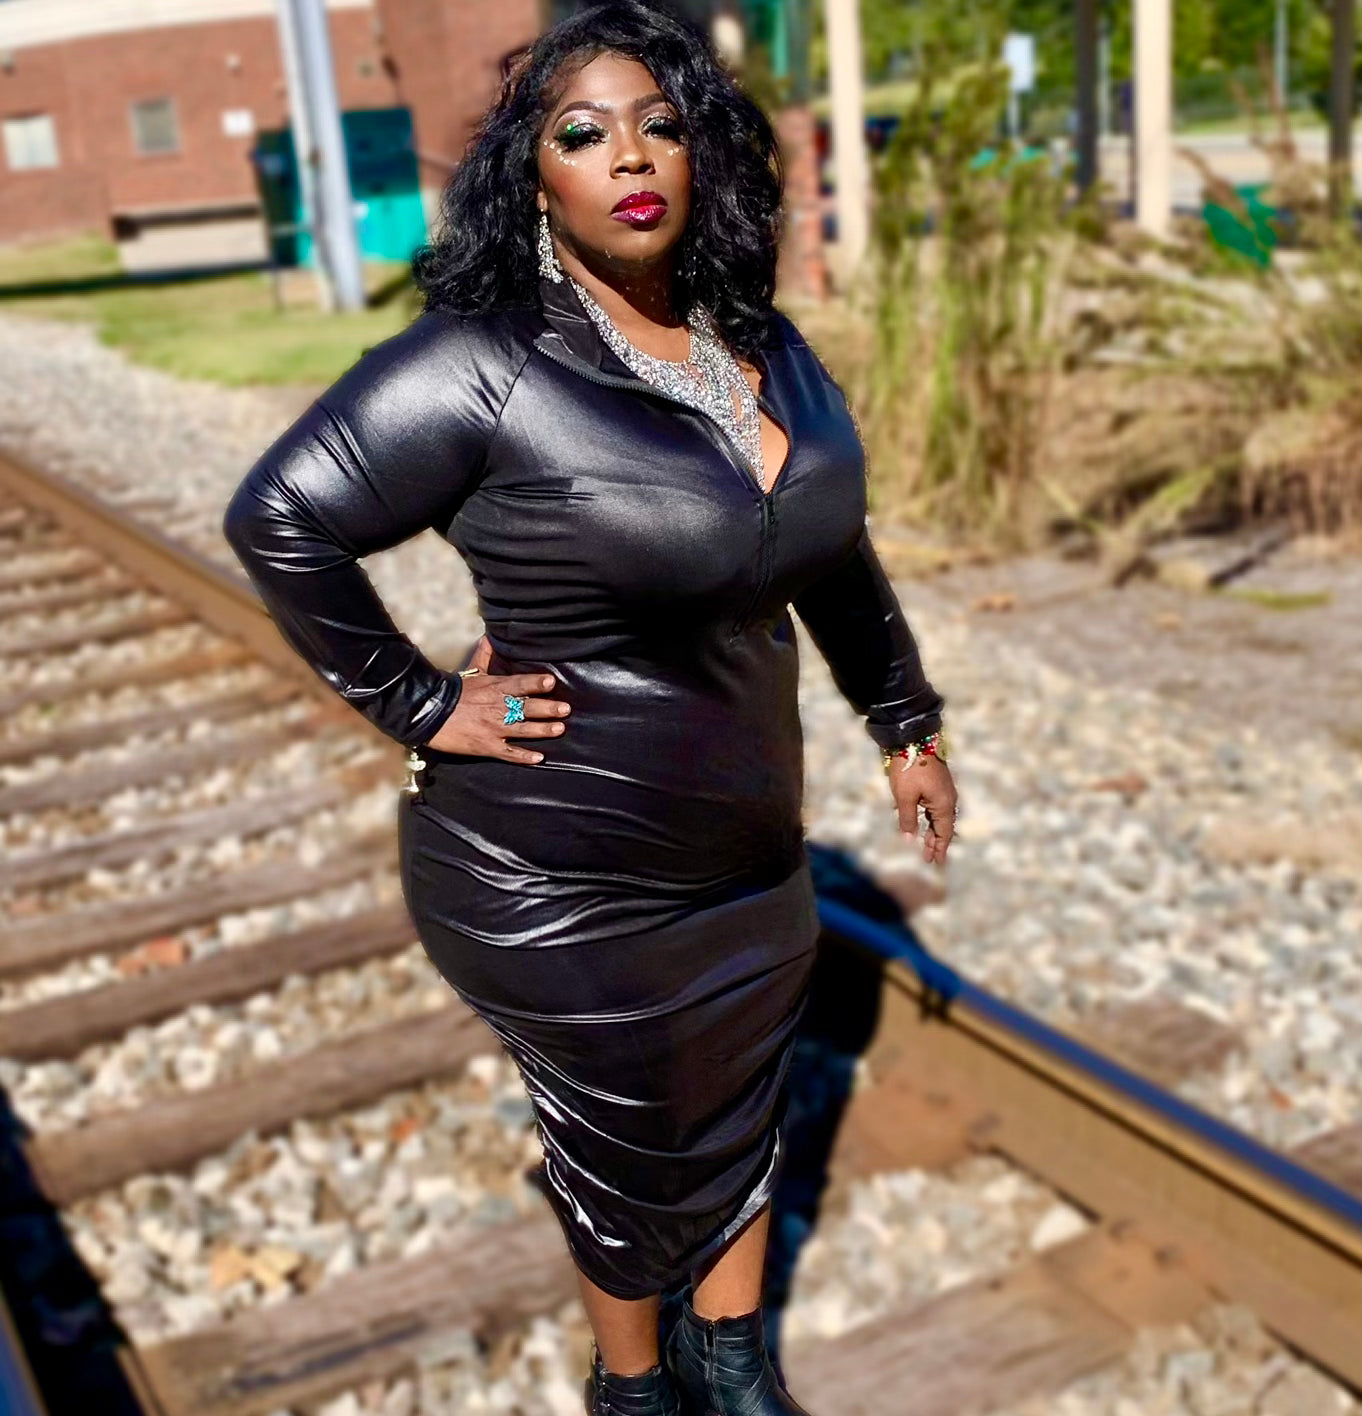 Plus Size Leather Clothes For Women Online